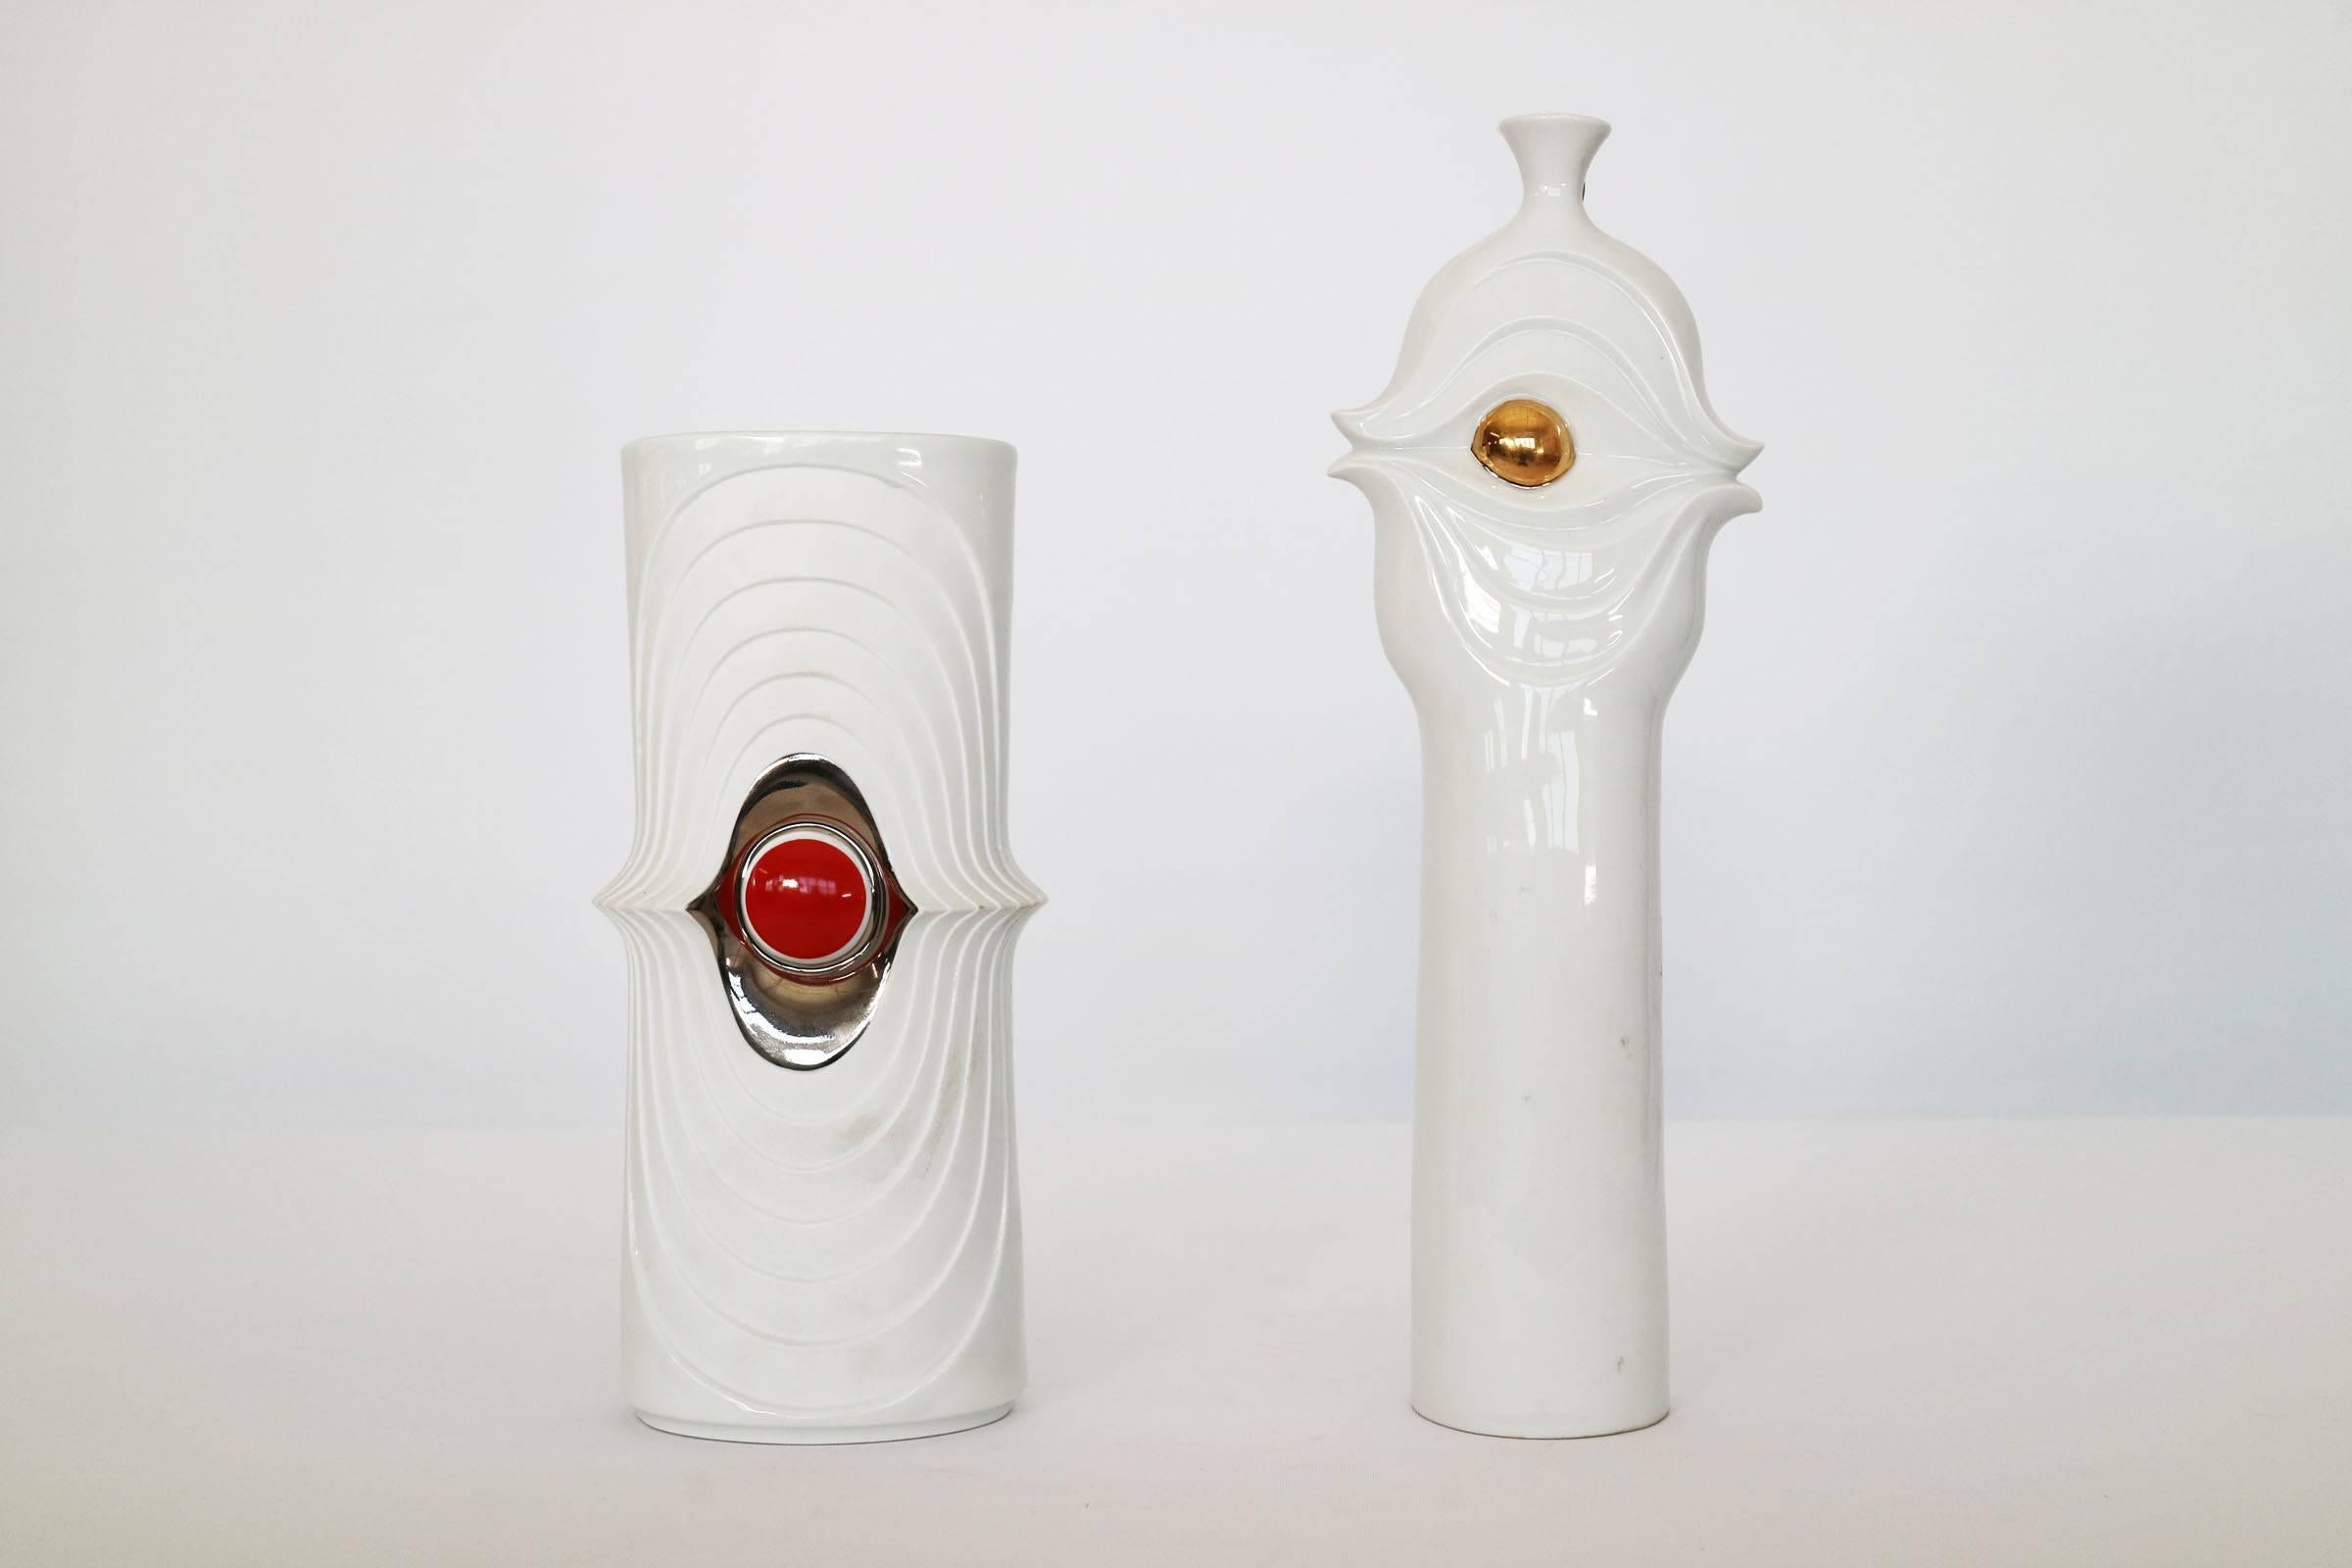 Rosenthal, white and gold paint Vase.
Pictured and sold separately, matching vase from the same series.